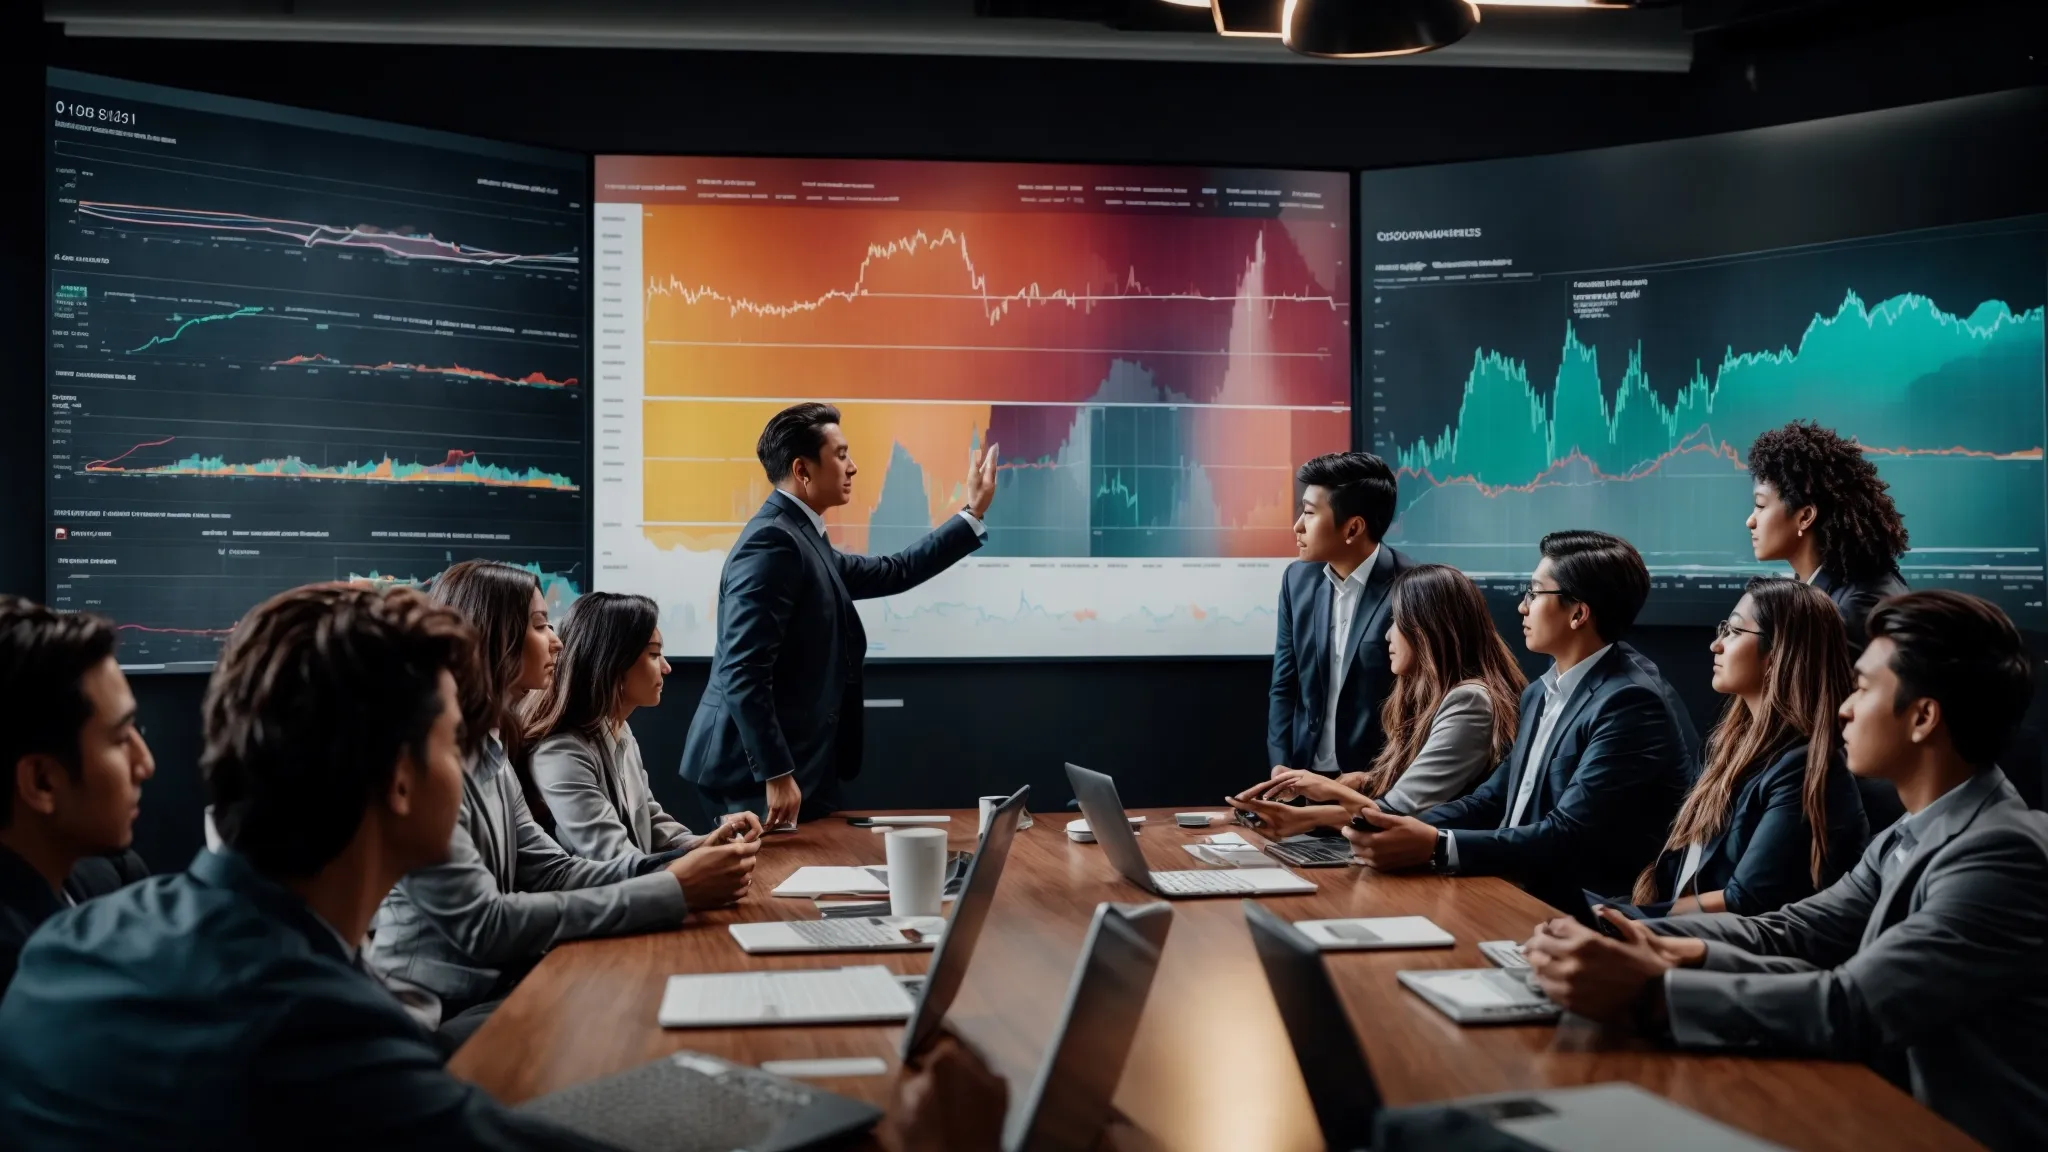 a group of digital marketers gathers around a large screen displaying colorful graphs and analytics dashboards during a strategy meeting.